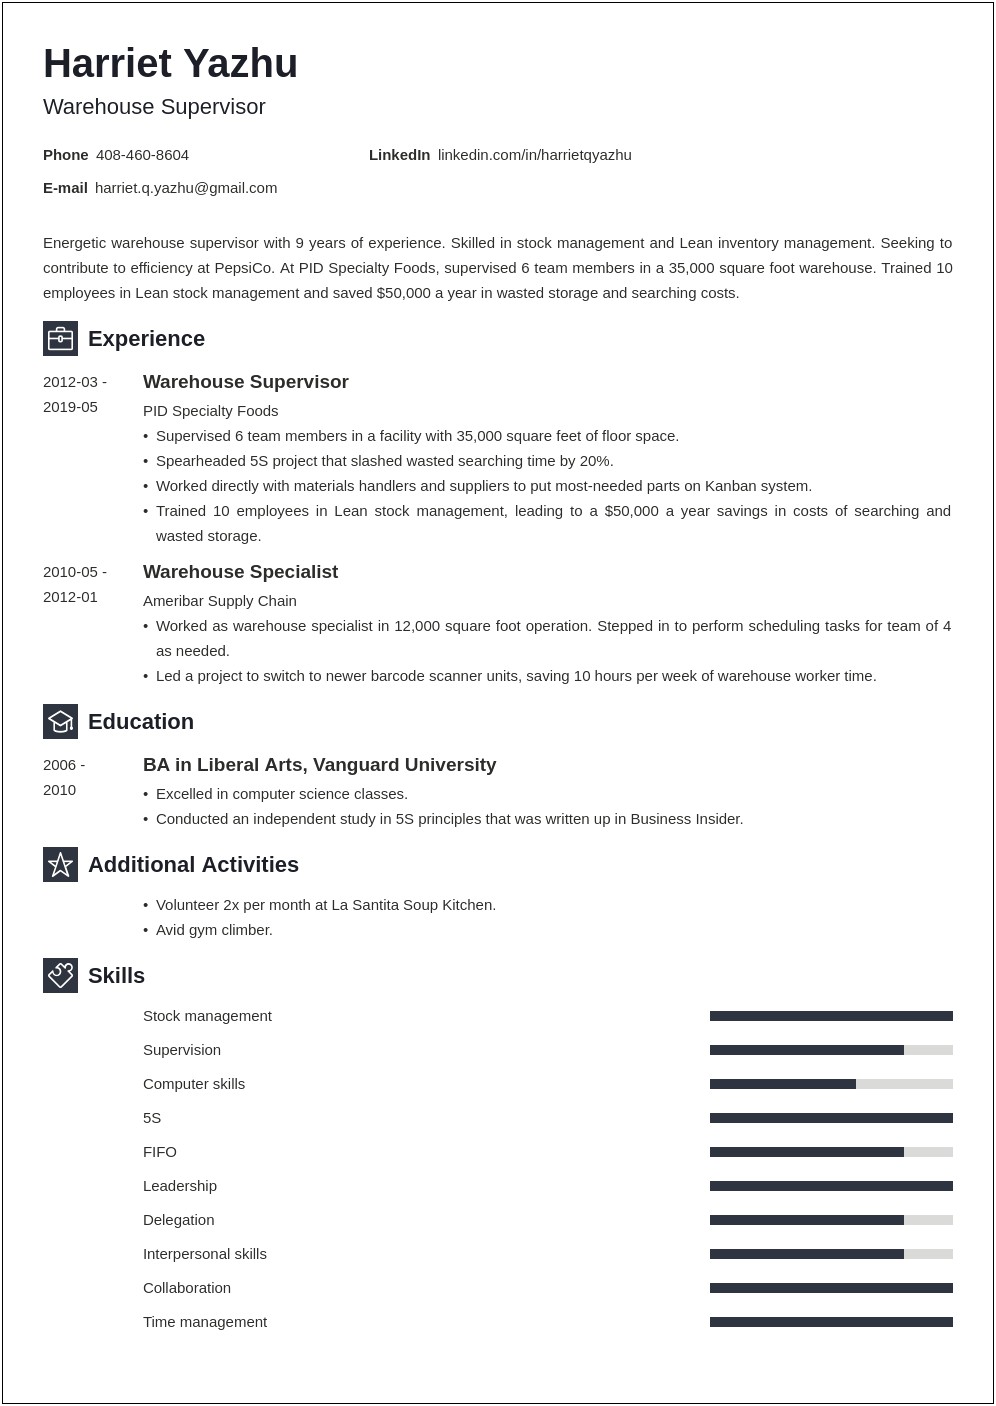 Resume Summary Inventory Control Manager